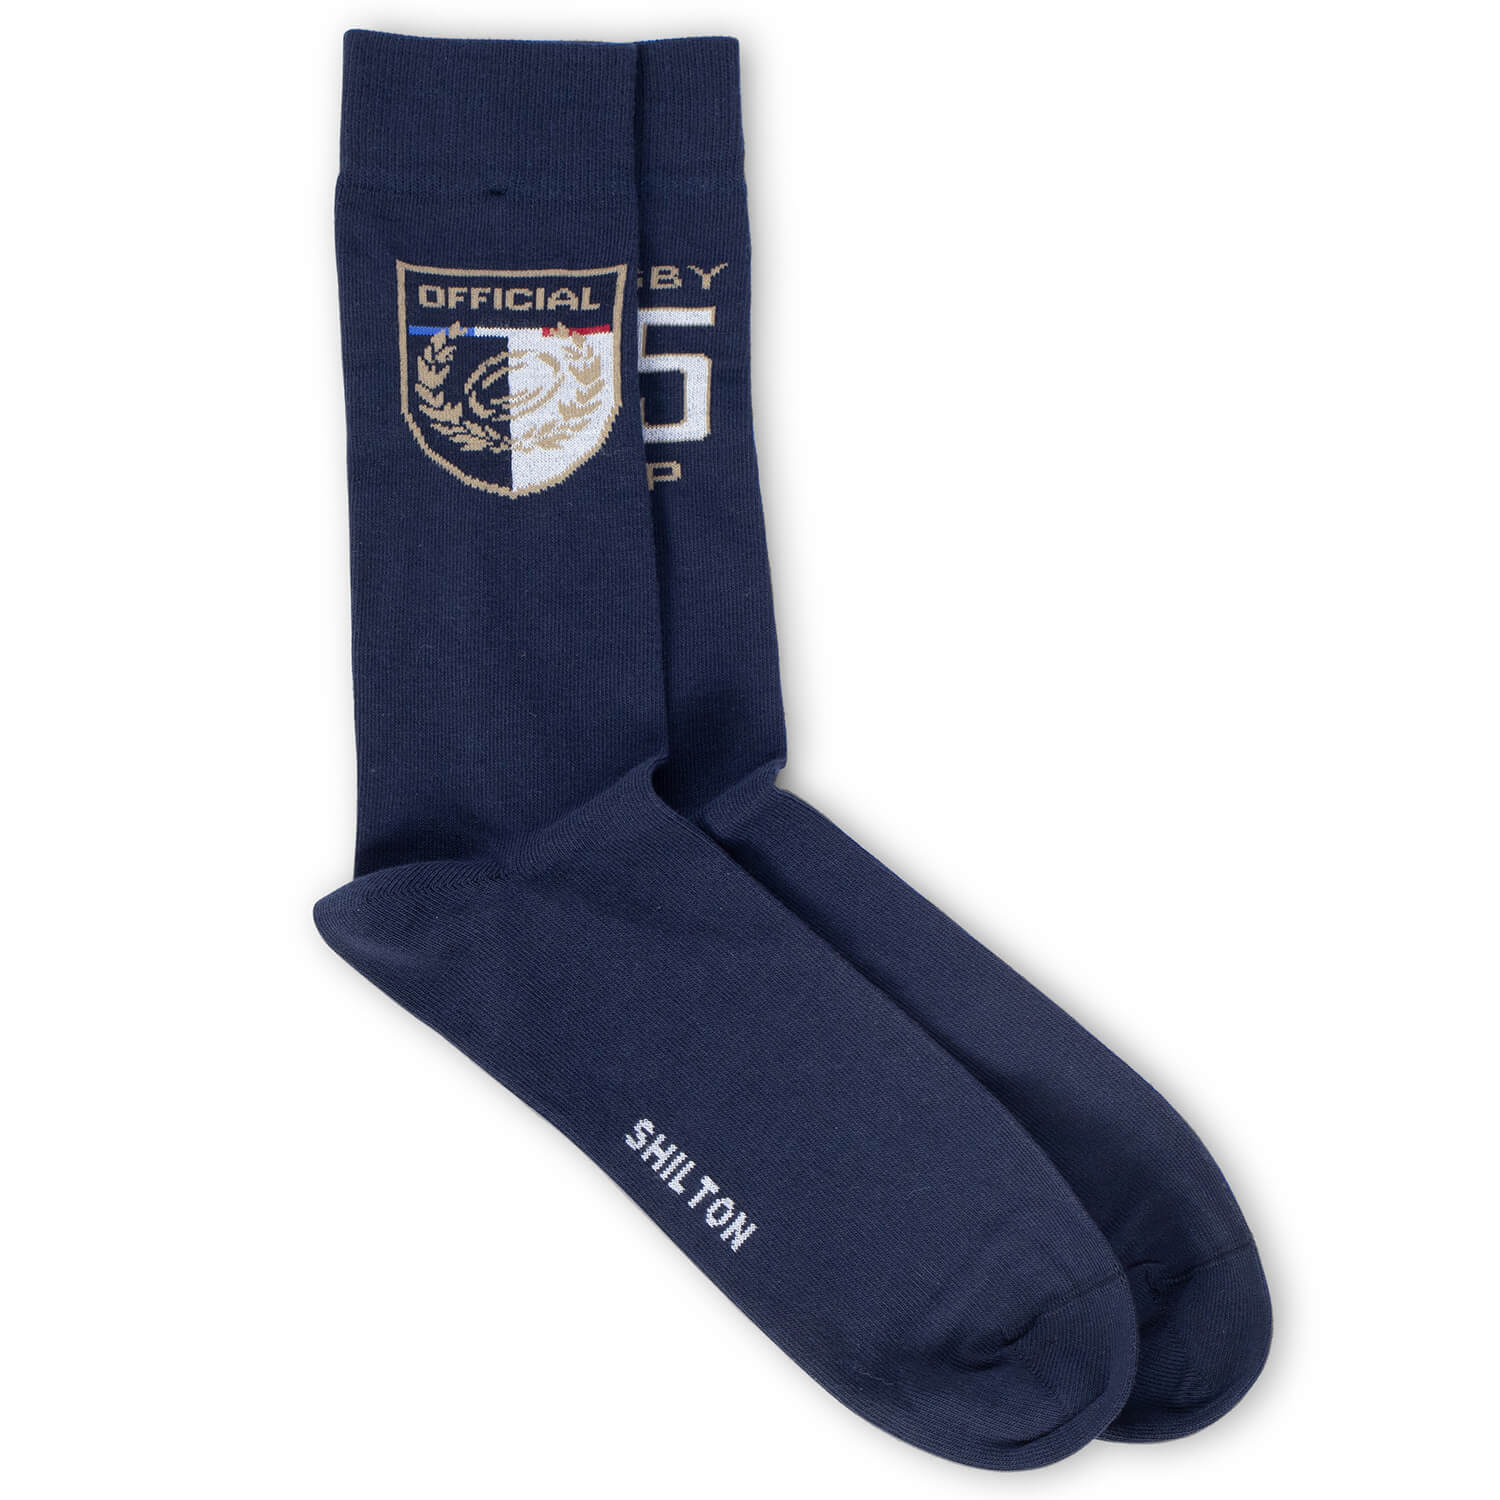 Chaussettes rugby nations